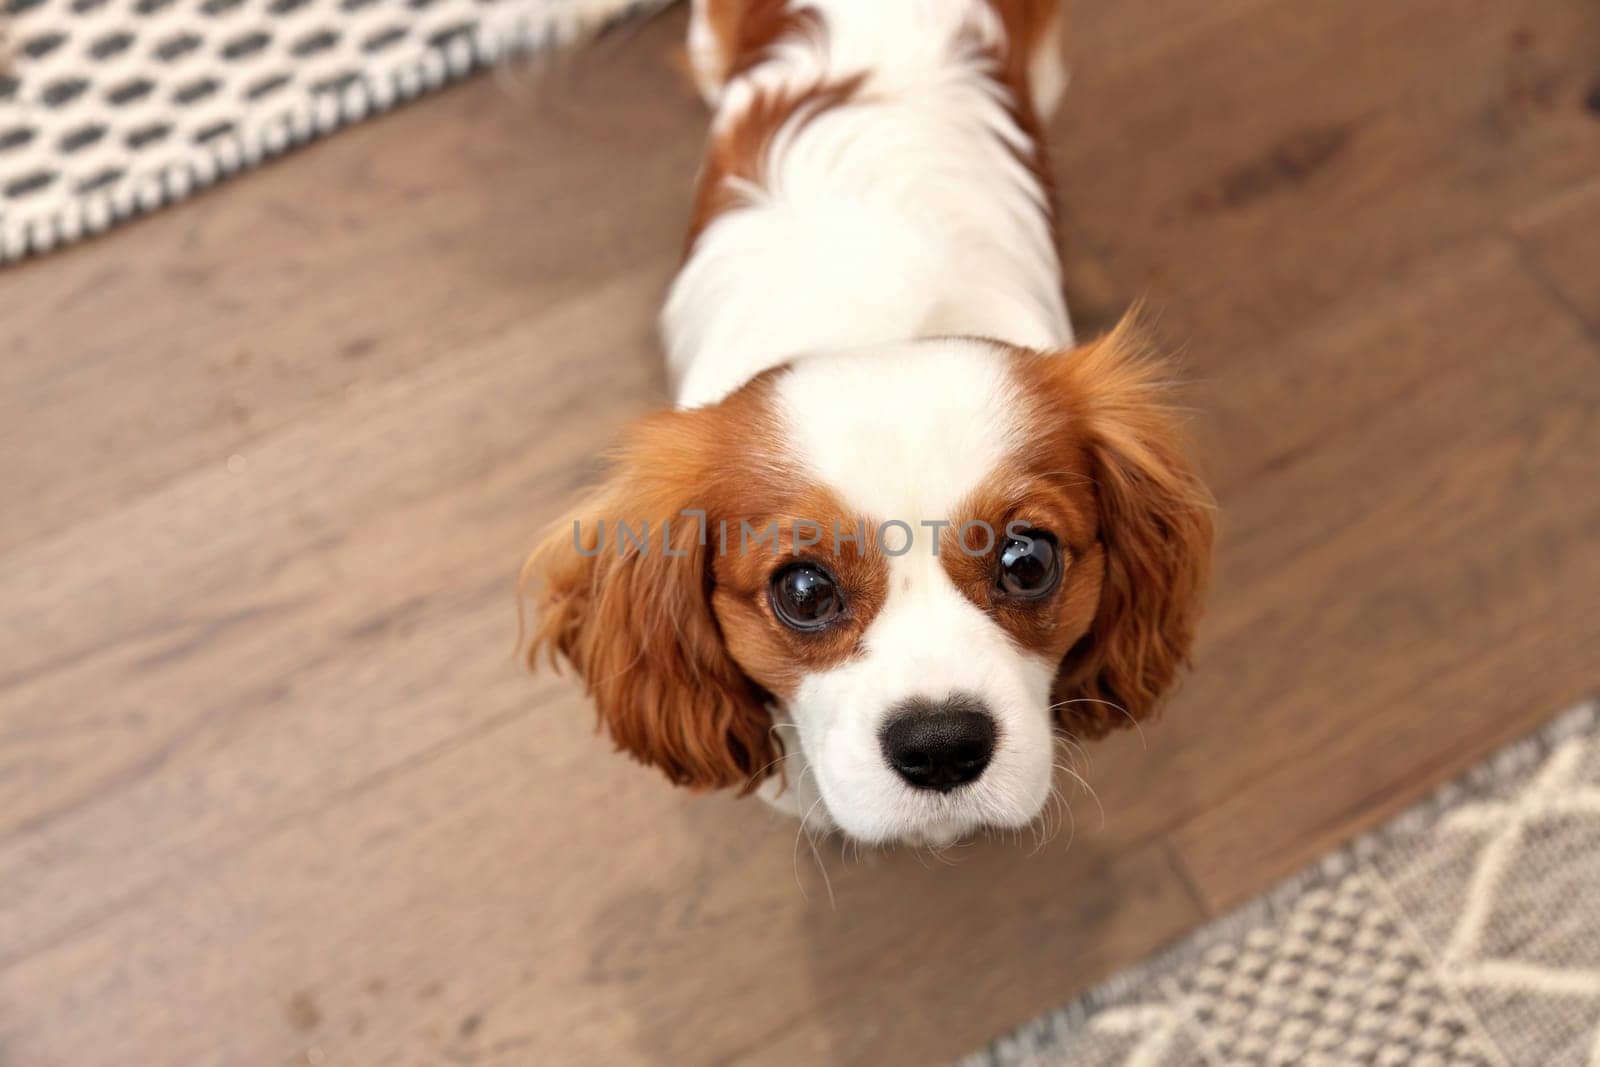 Adorable Cavalier King Charles Spaniel Looking Expectantly Up at Camera with Puppy Dog Eyes by markvandam